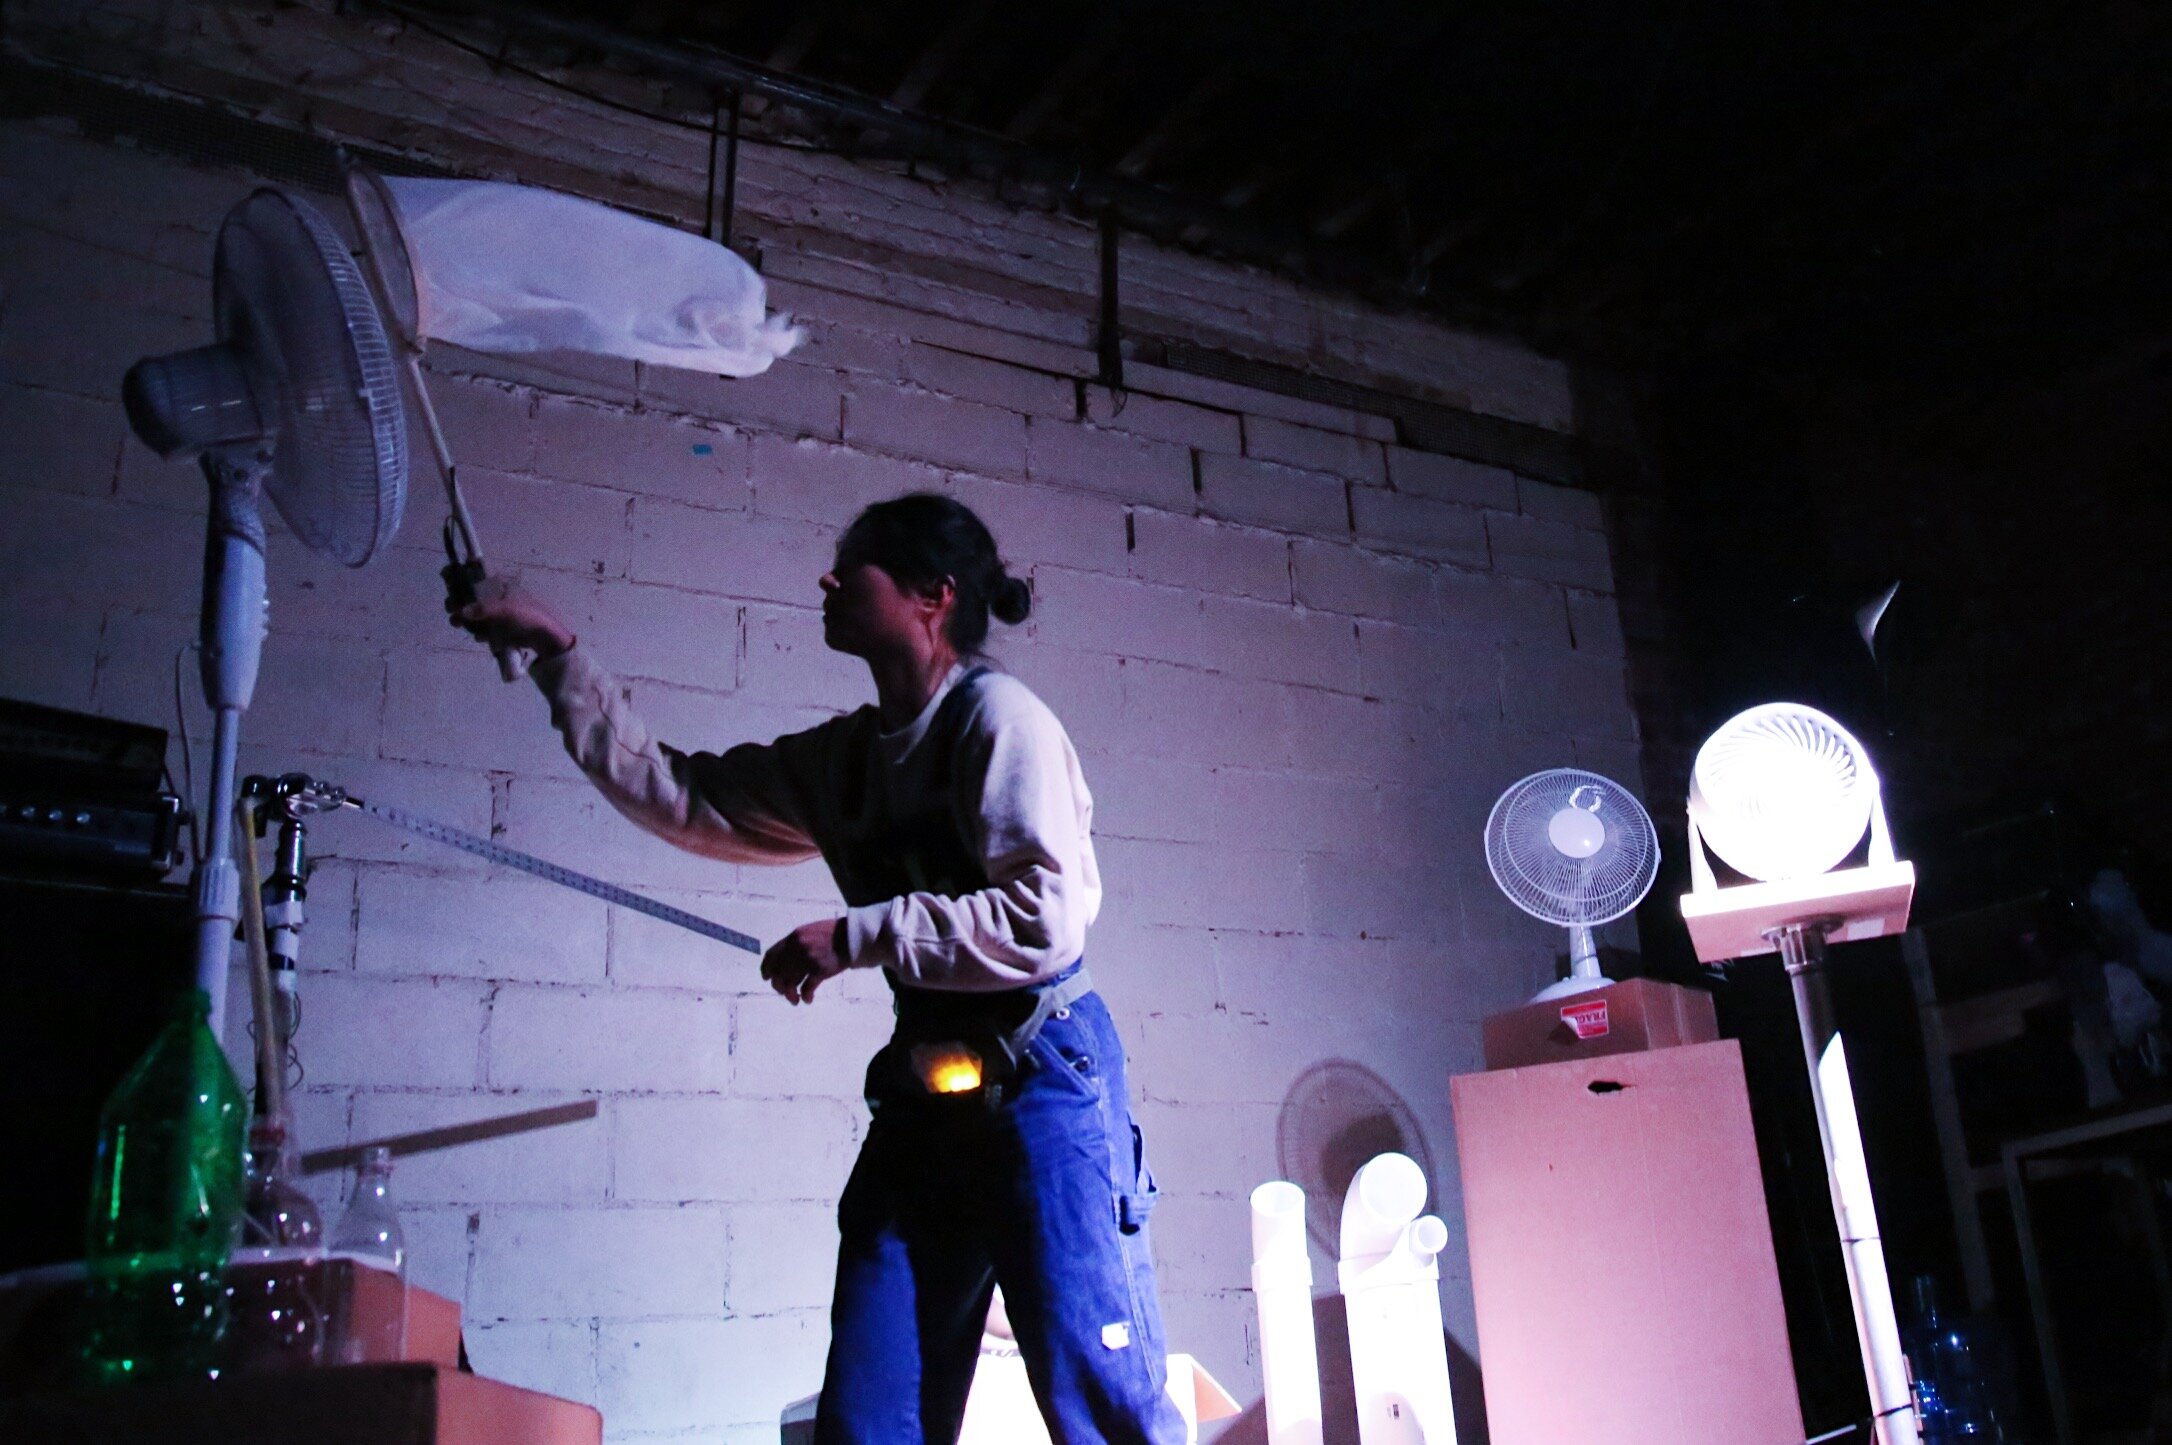  The Wind Catcher  by Wenjing Liu 3.12.20 / 8PM An audiovisual performance that interprets the absurdity of human’s efforts to find meanings in seemingly insignificant matters through defining goals, setting rules and executing tasks.  